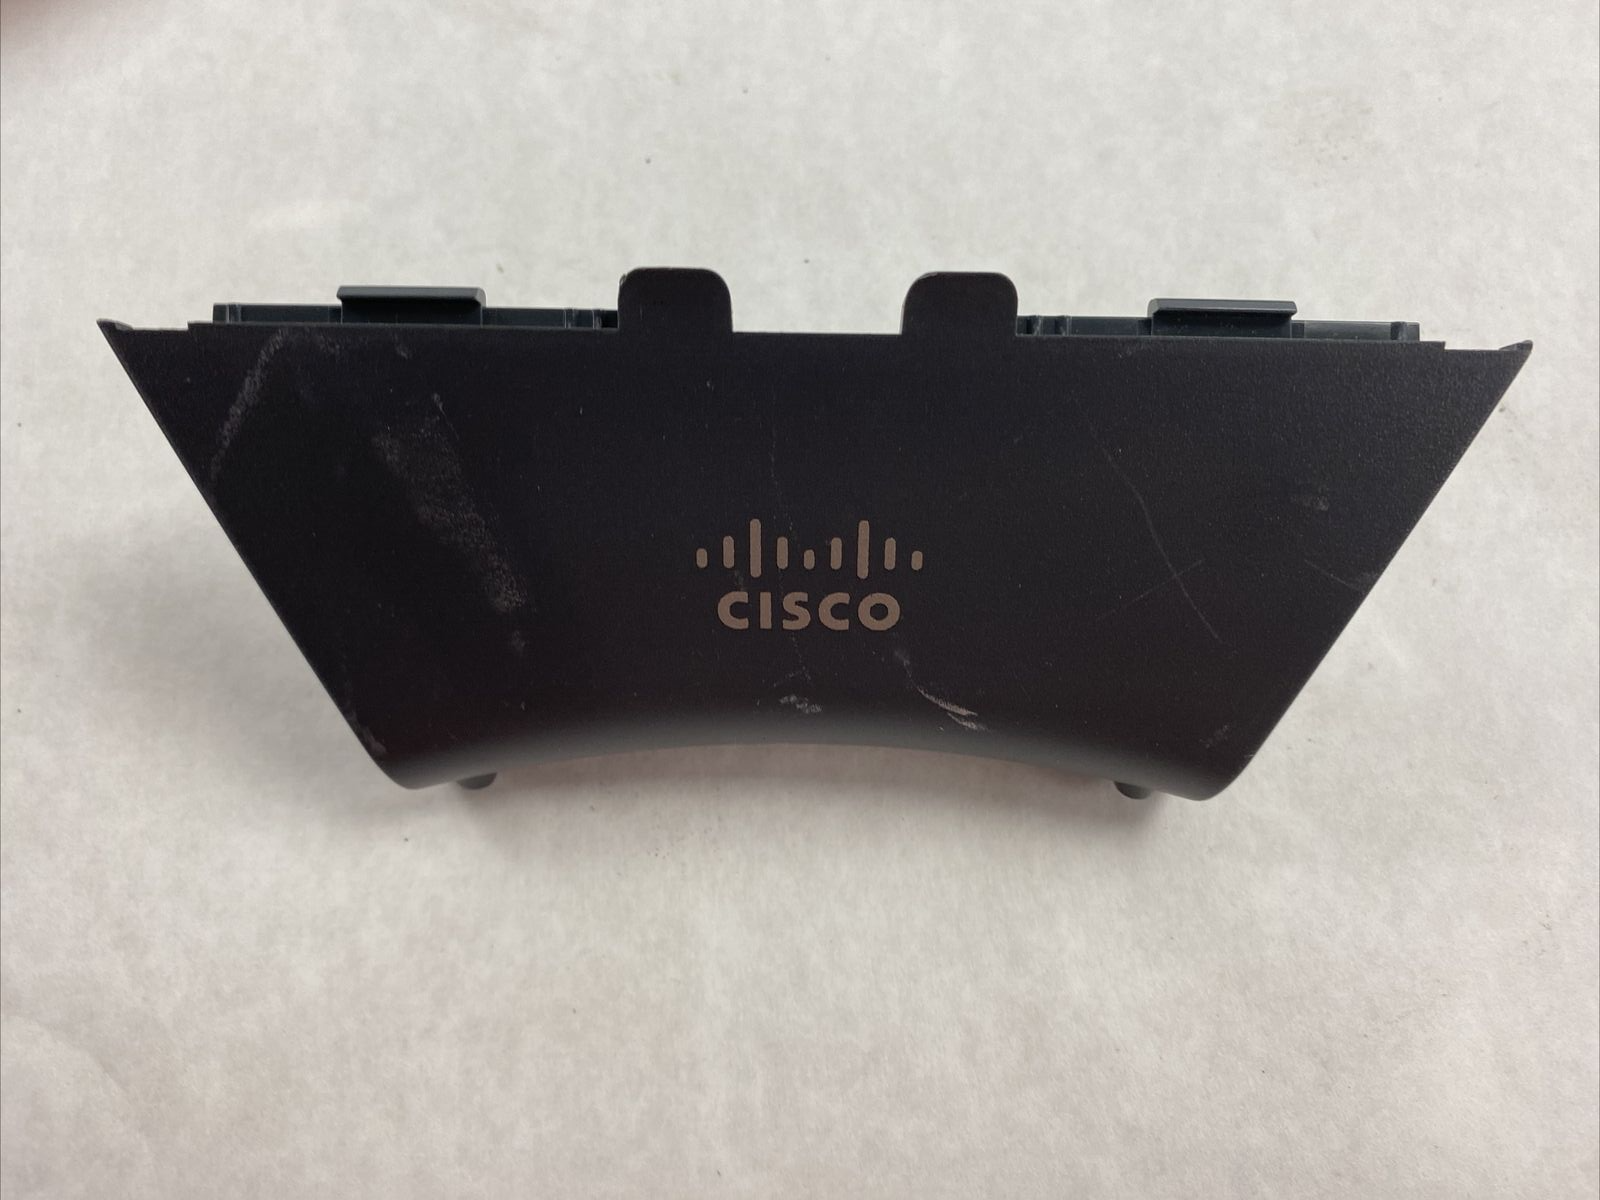 Lot of 8 Cisco Series 7900 Phone Base Foot Stand